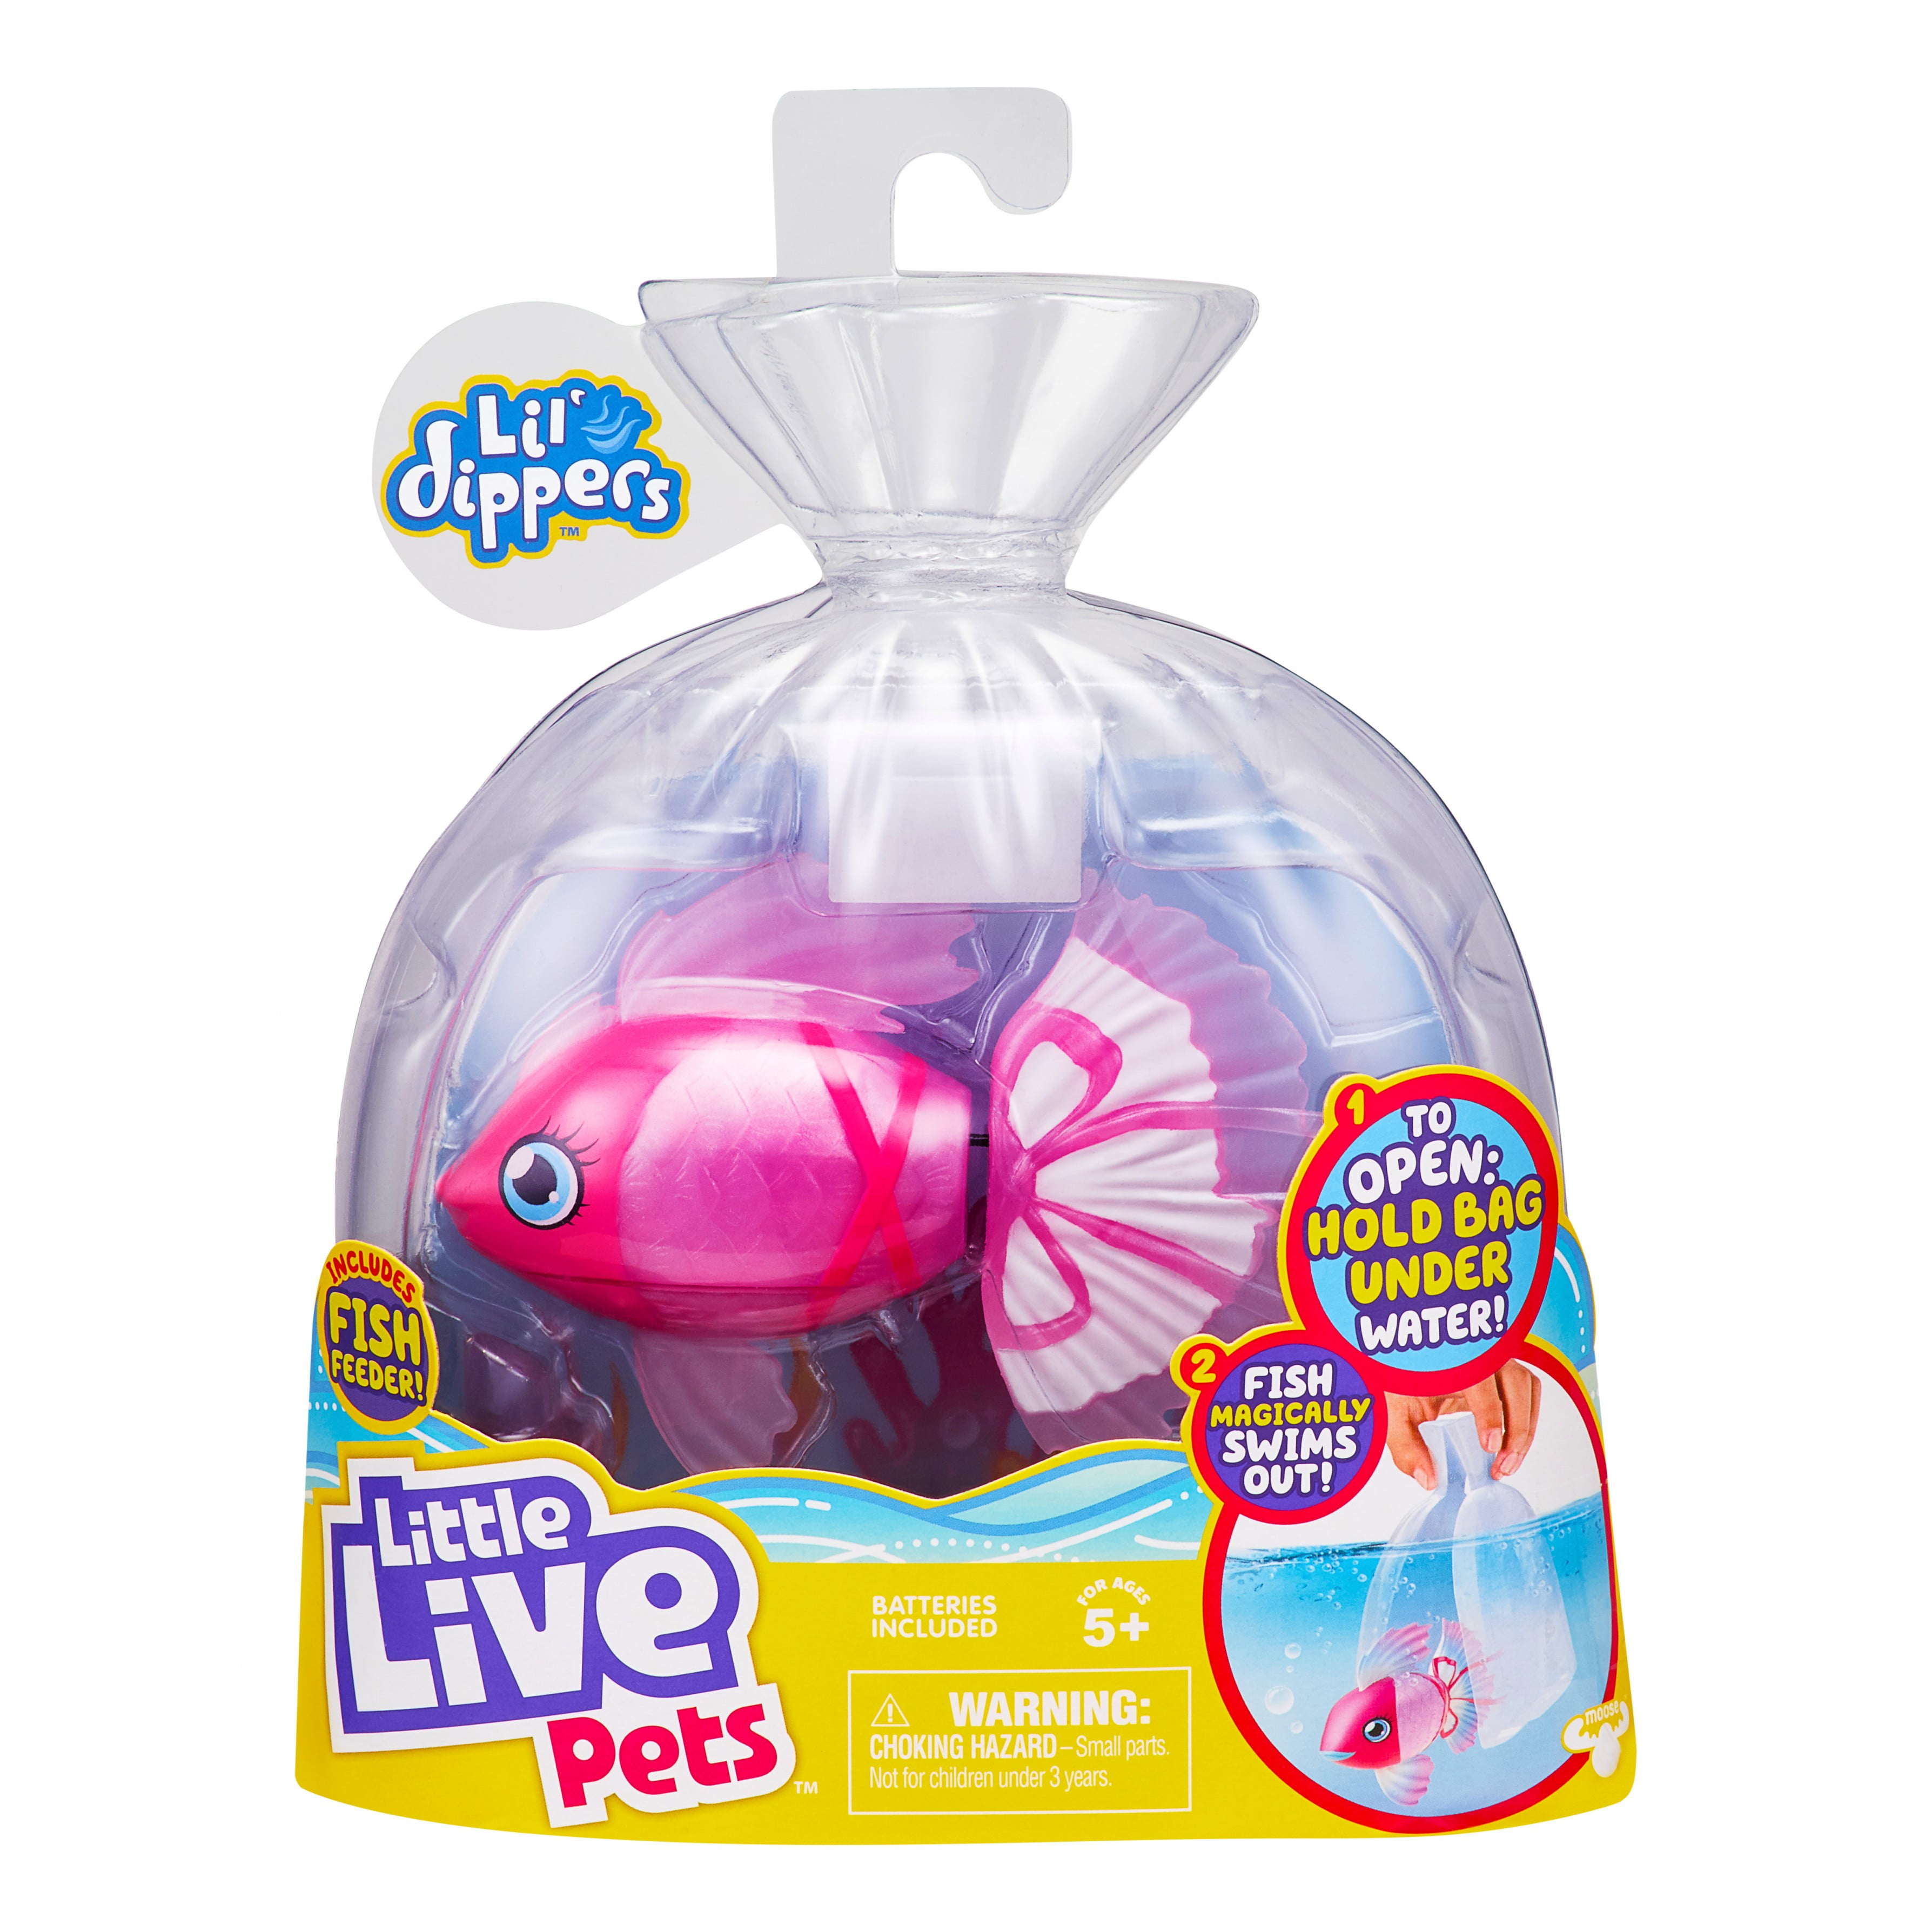 Lil Dippers Little Live Pets Multicolor Series 1 Bellariva Figures Action Toy Figures